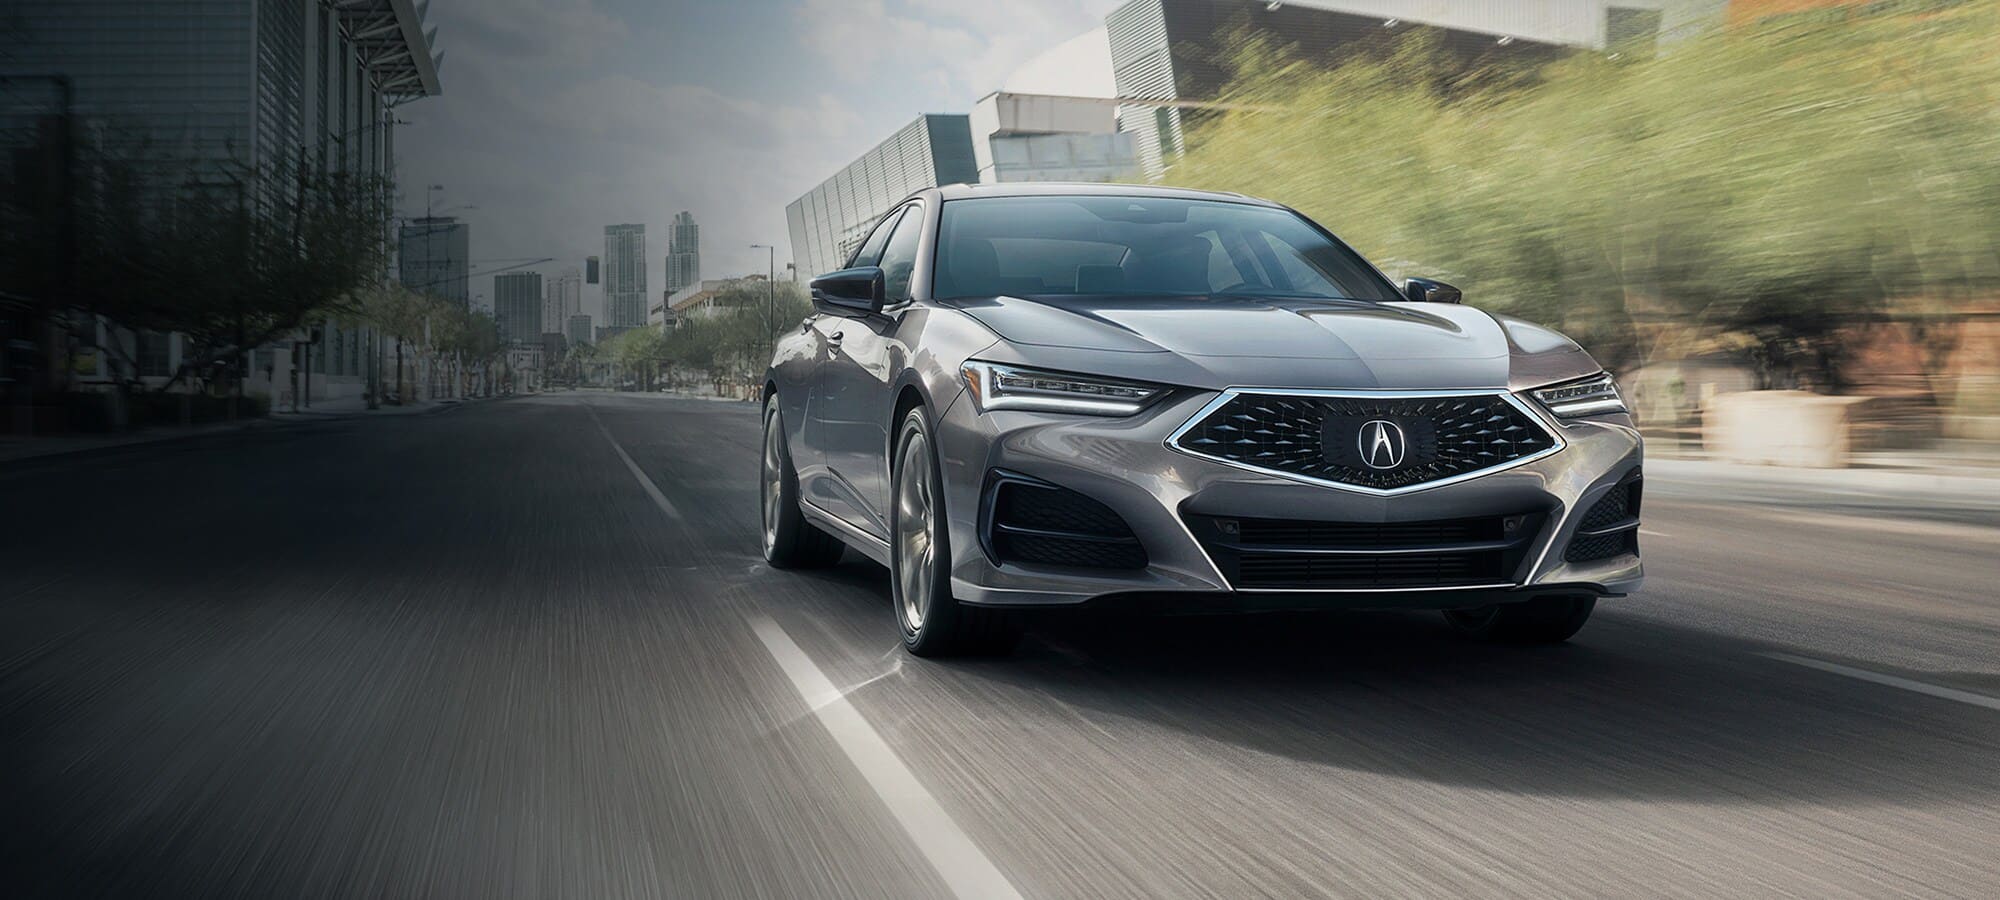 Looking for a new Acura in Naples, Florida? Check out the 2023 Acura lineup at your local Naples Acura dealer. From the latest sedans and SUVs to the most technologically advanced Acura models, there's an Acura for everyone at your Naples Acura dealer. Schedule a test drive today and experience the Acura difference!